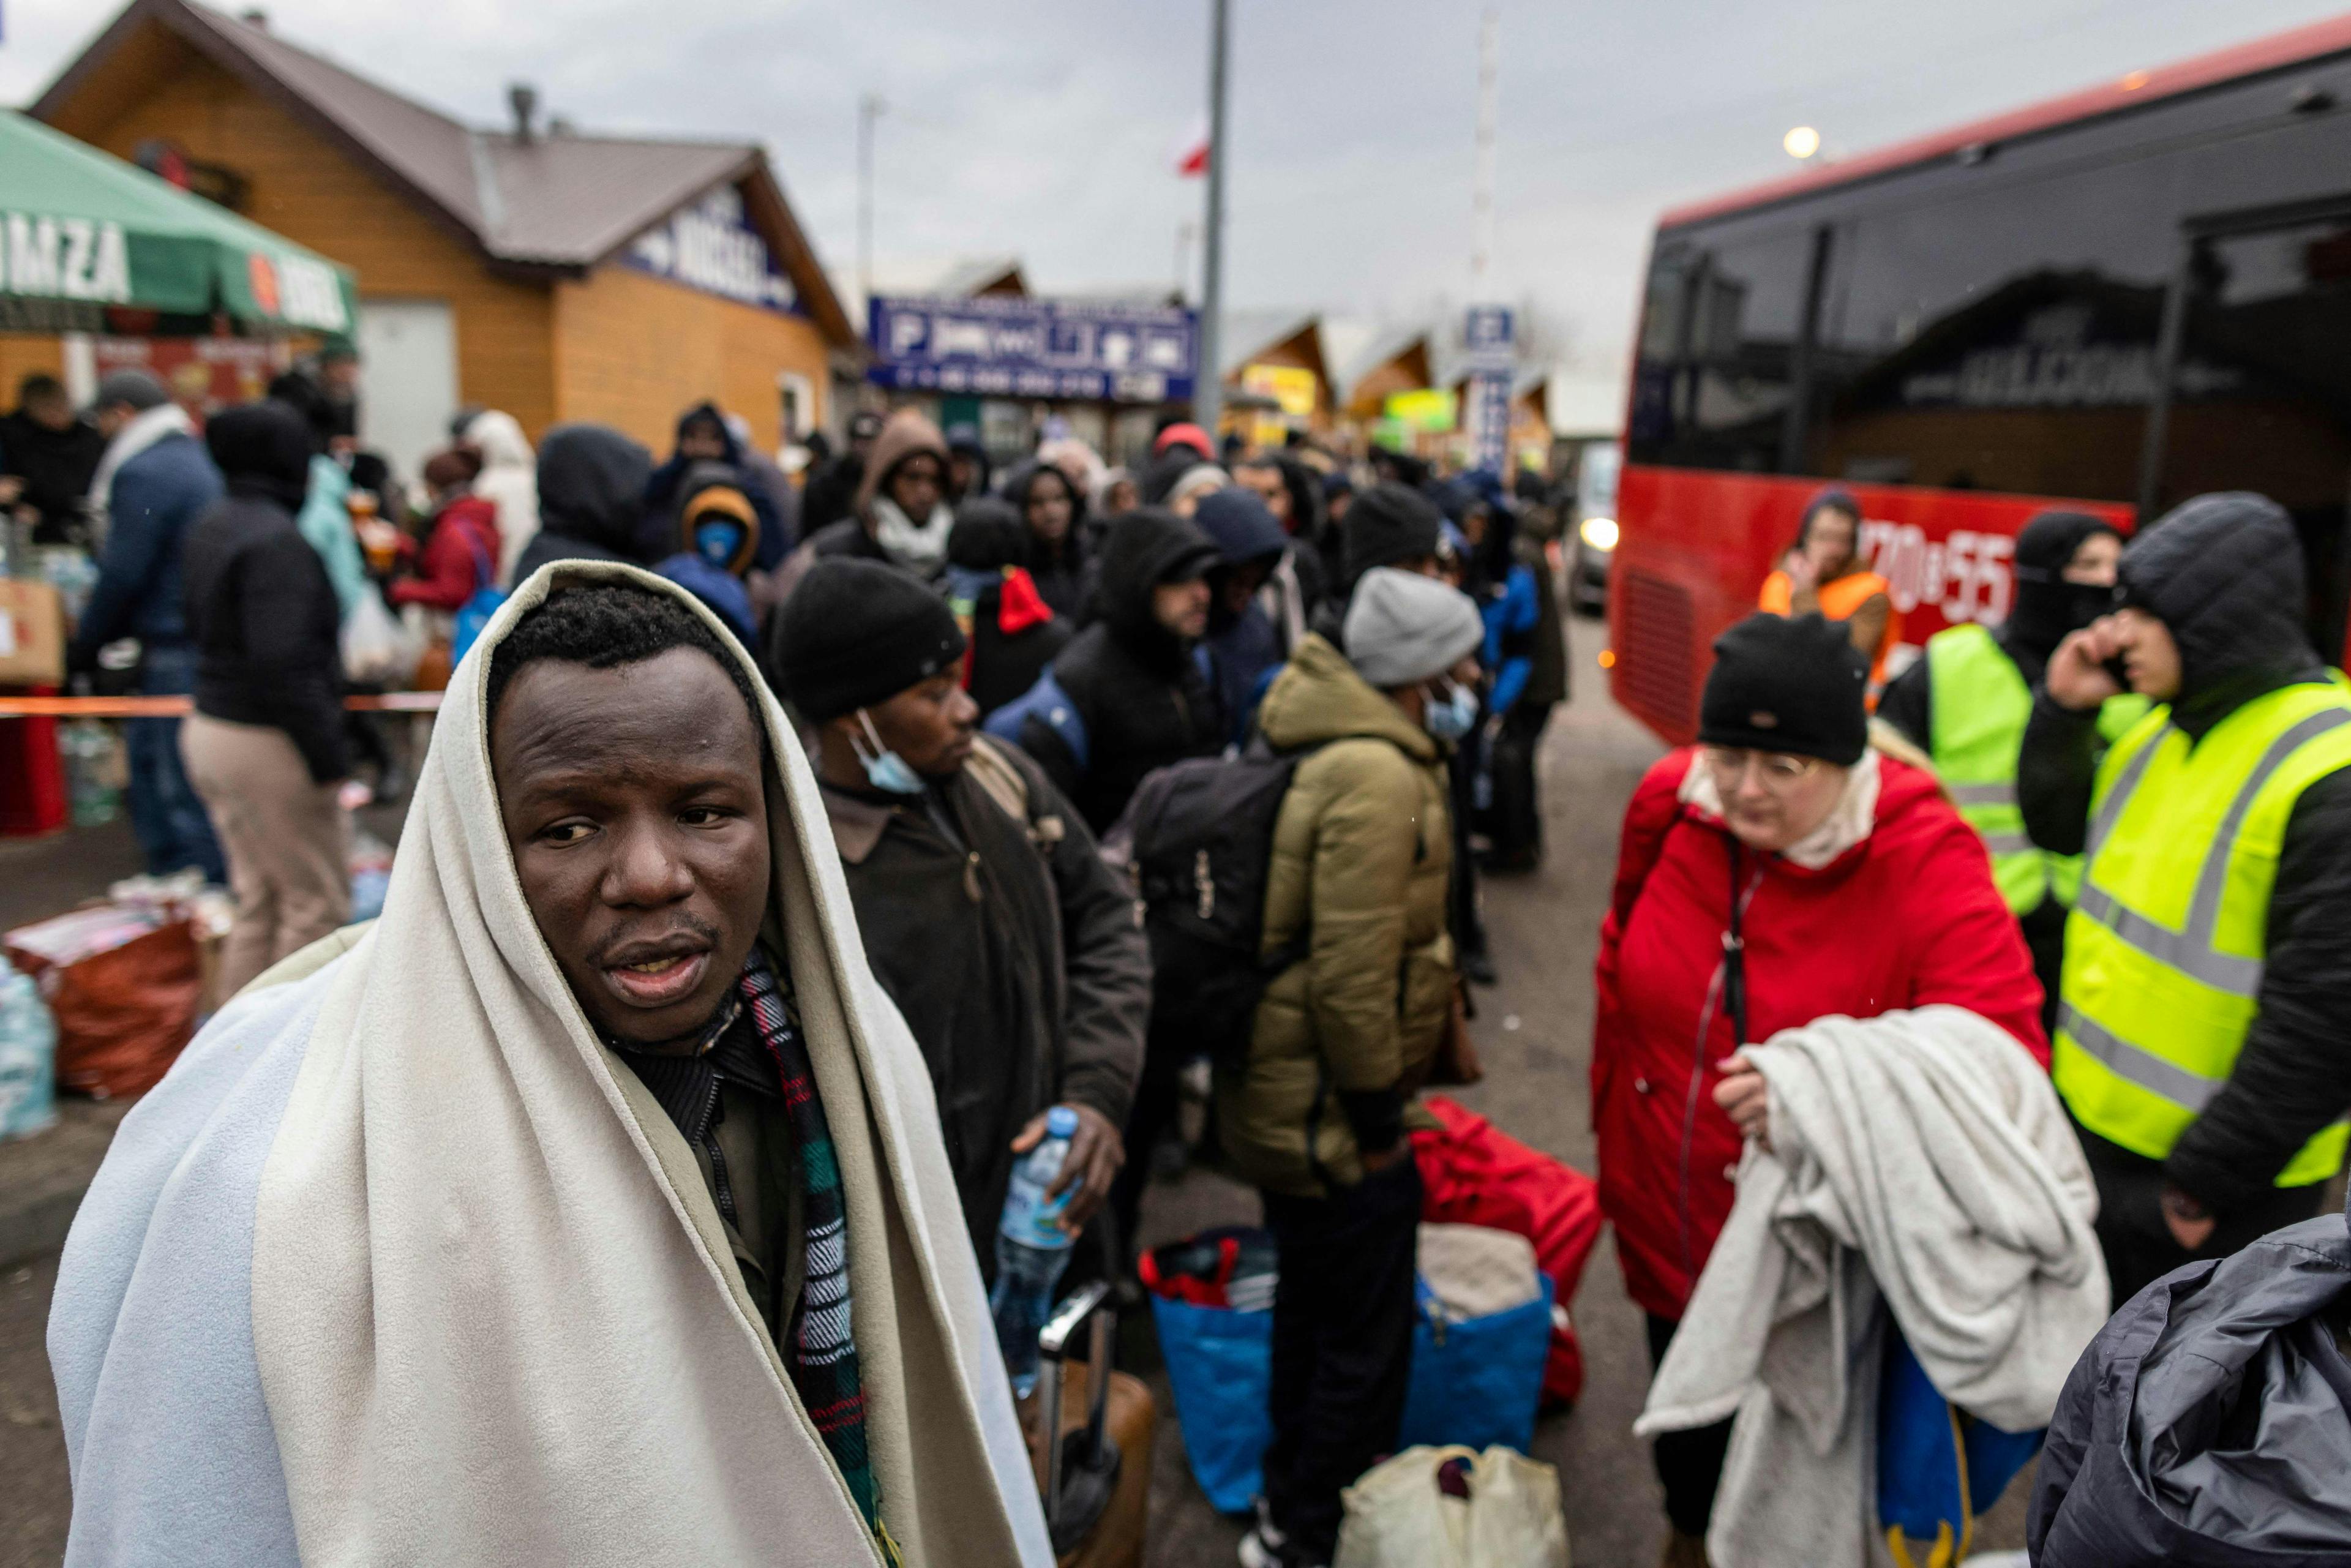 Ukrainian refugees waiting to get on a bus.